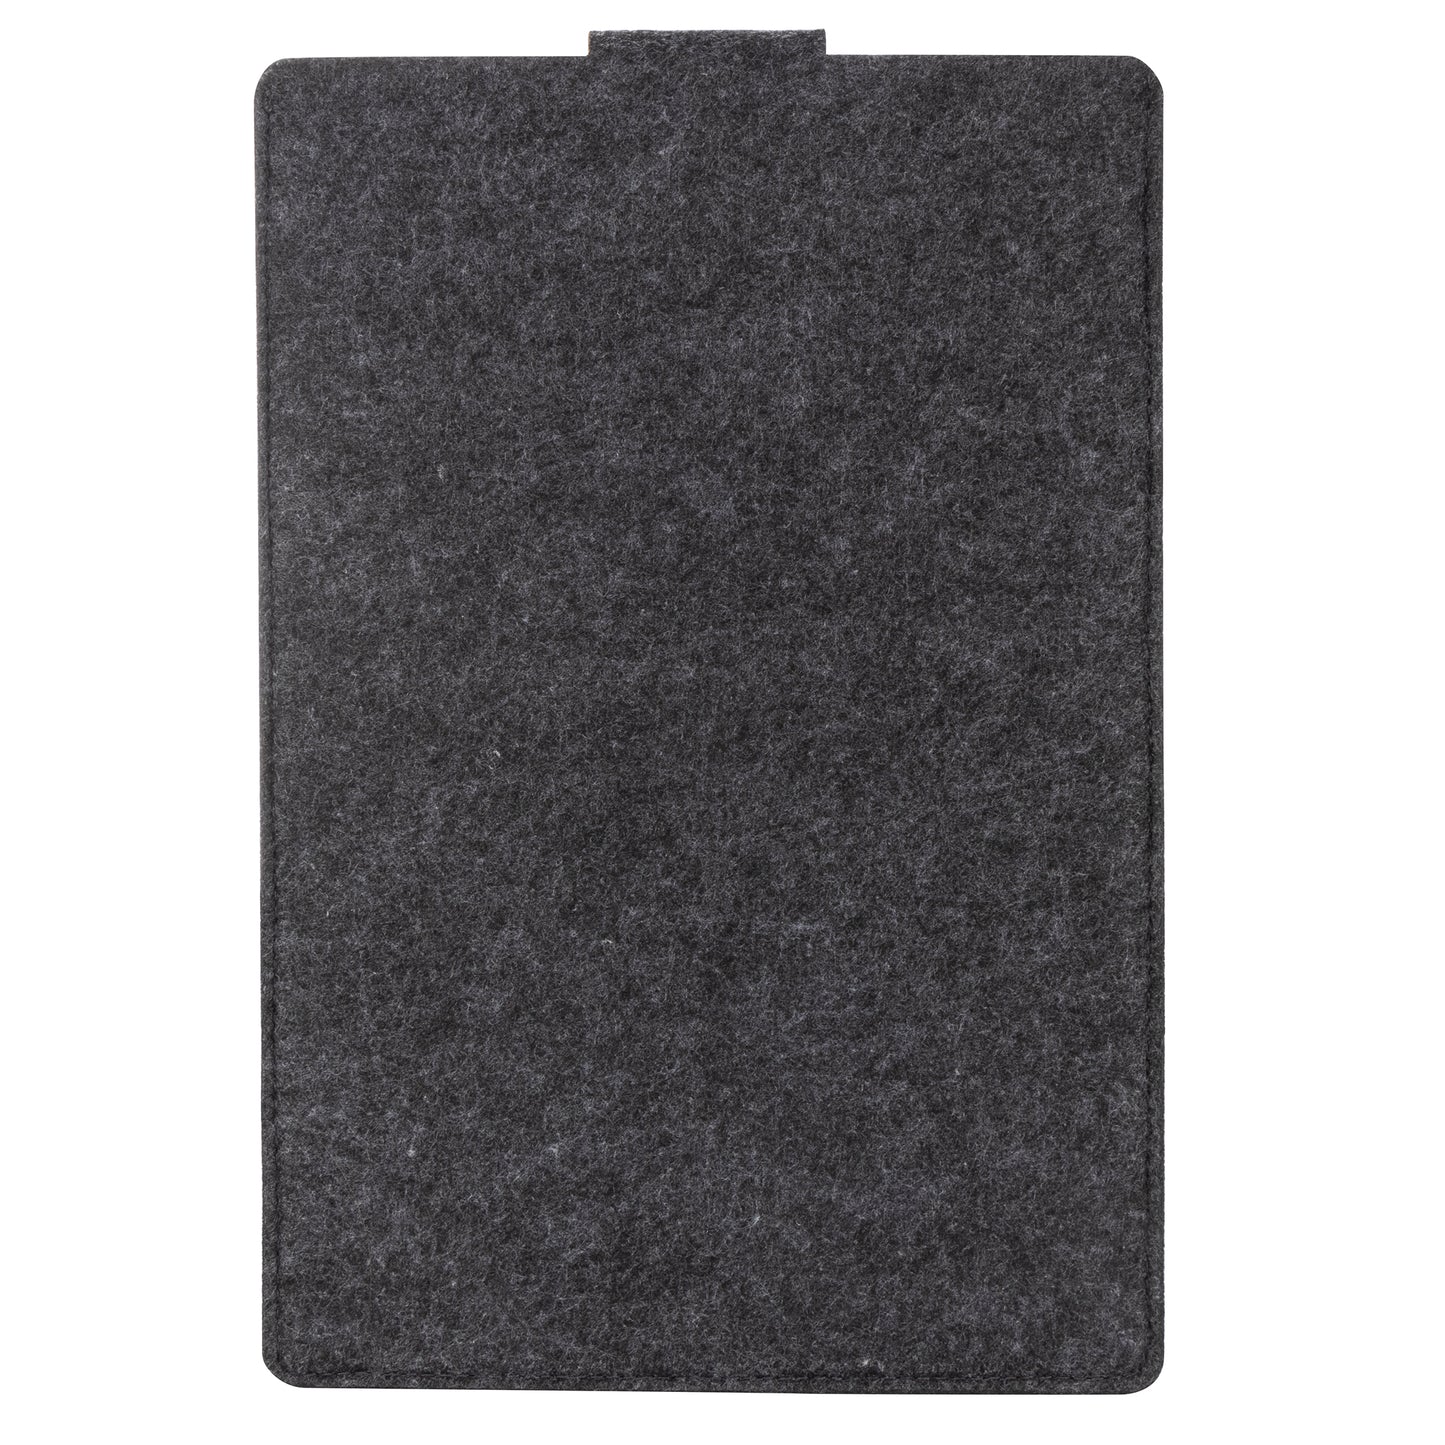 Charcoal Gray Felt Tablet Sleeve Carrying Case - back view